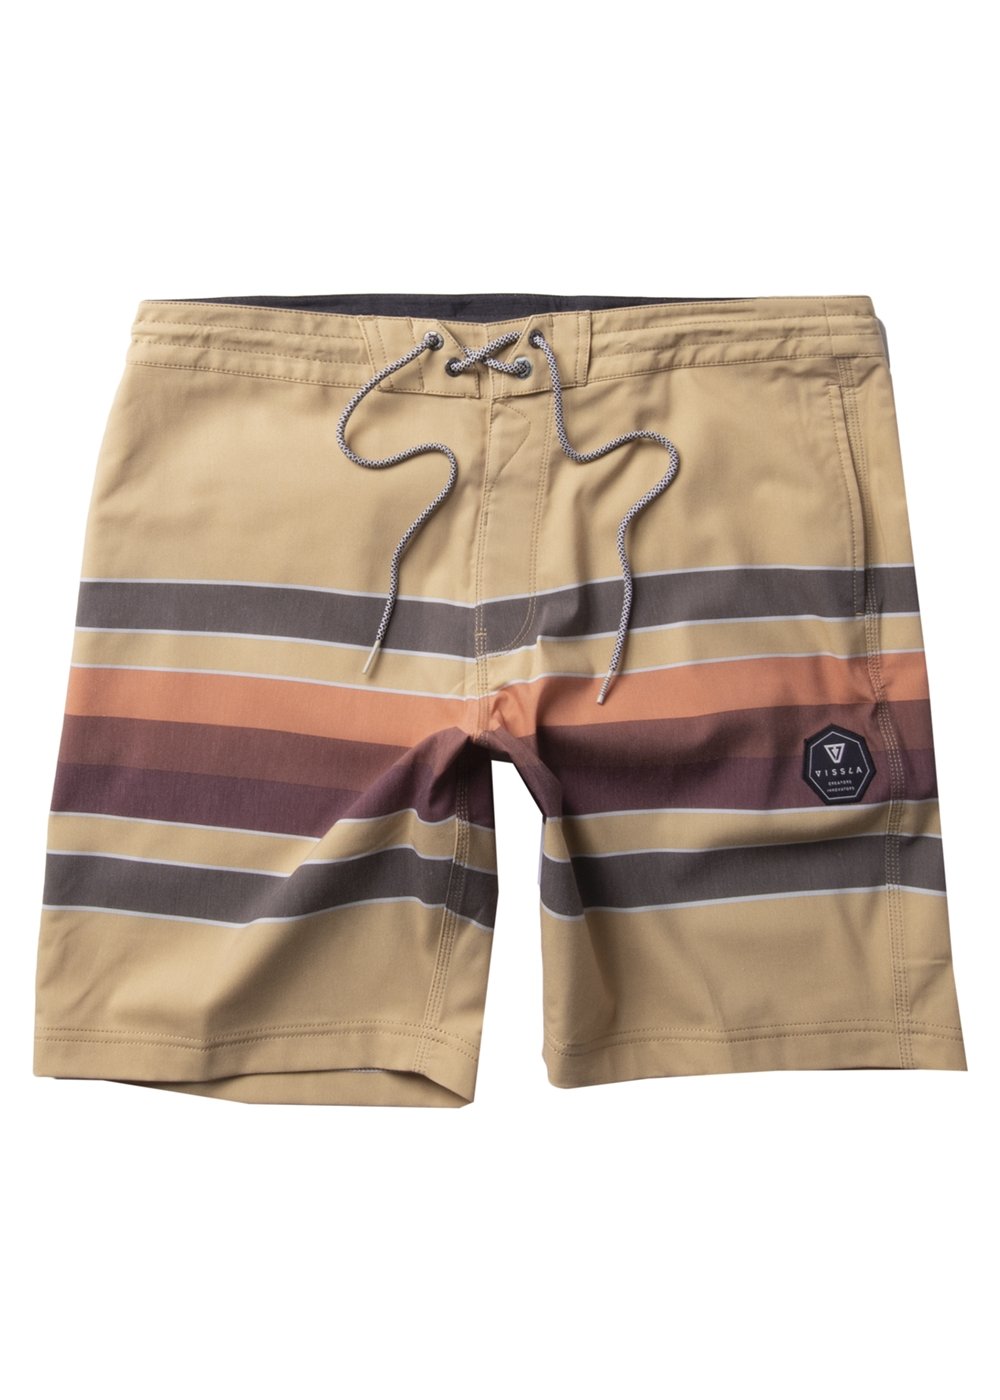 Vissla Ochre 17" Boys Fist Bump Boardshort Front View. Multi Colored Print with Patch.